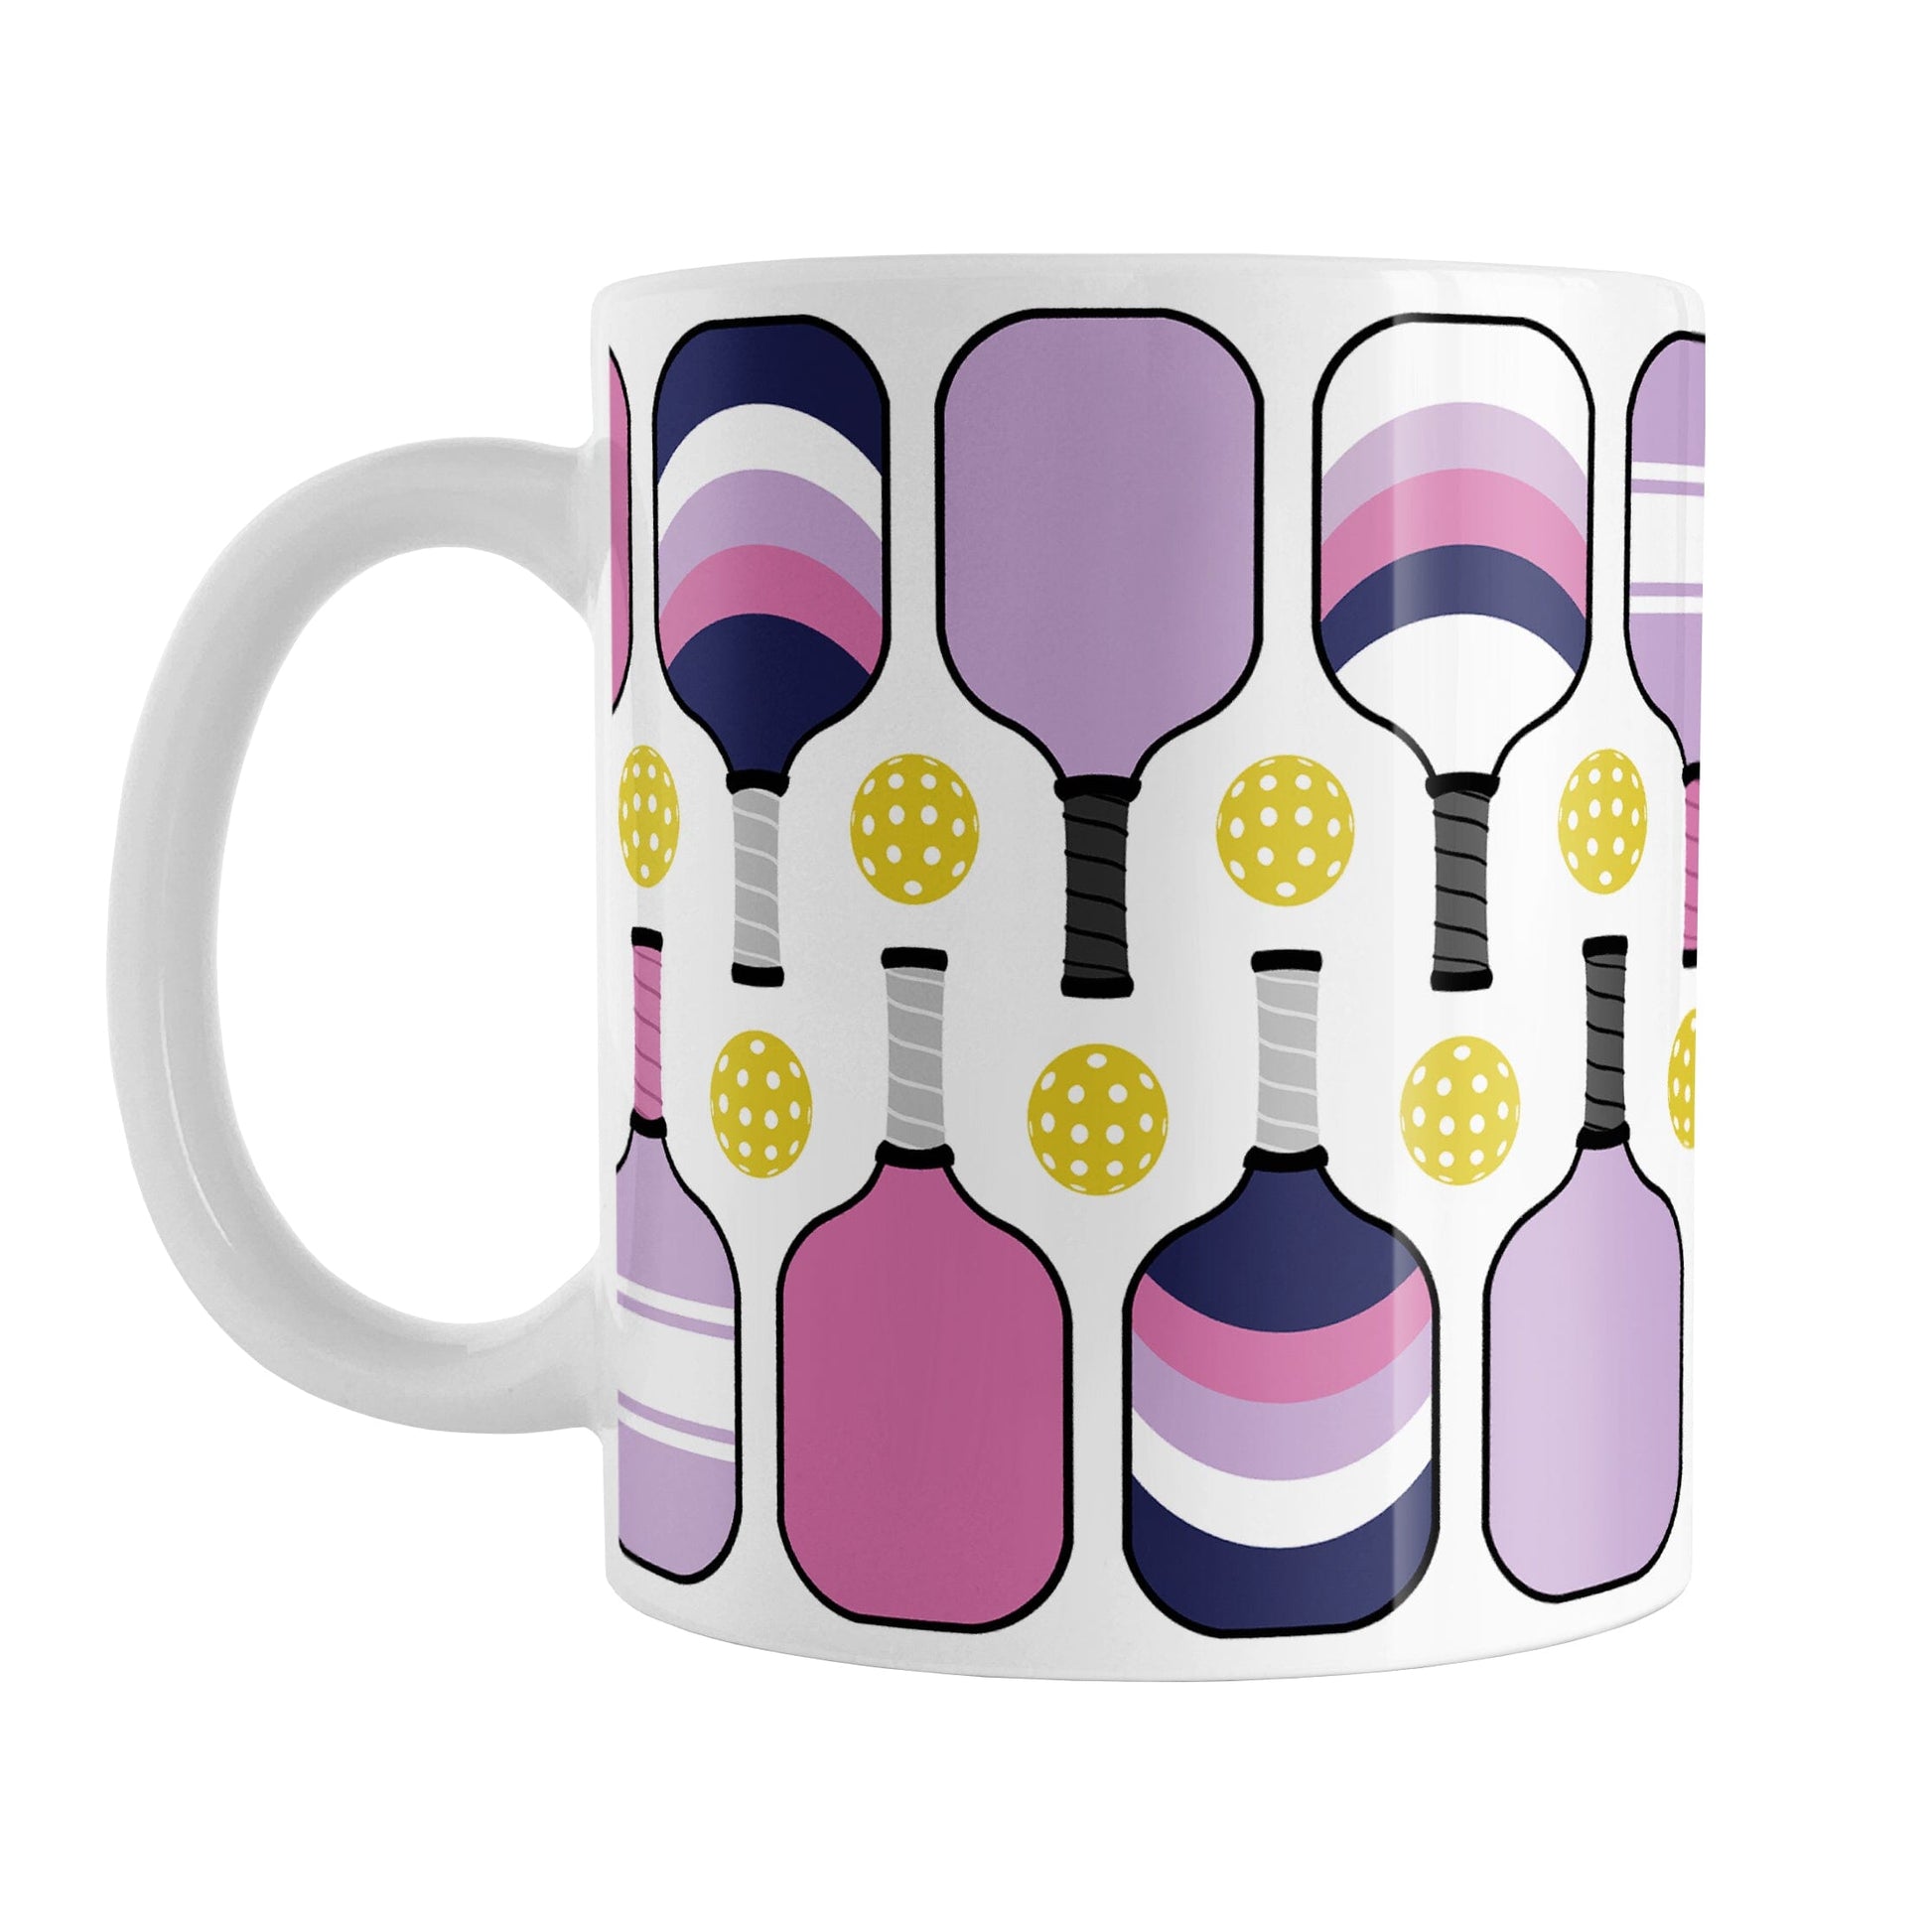 Pink Purple Navy Pickleball Mug (11oz) at Amy's Coffee Mugs. A ceramic coffee mug designed with modern pickleball paddles in bold pink, light purple, and dark navy blue, along with yellow balls in a pattern that wraps around the mug up to the handle.